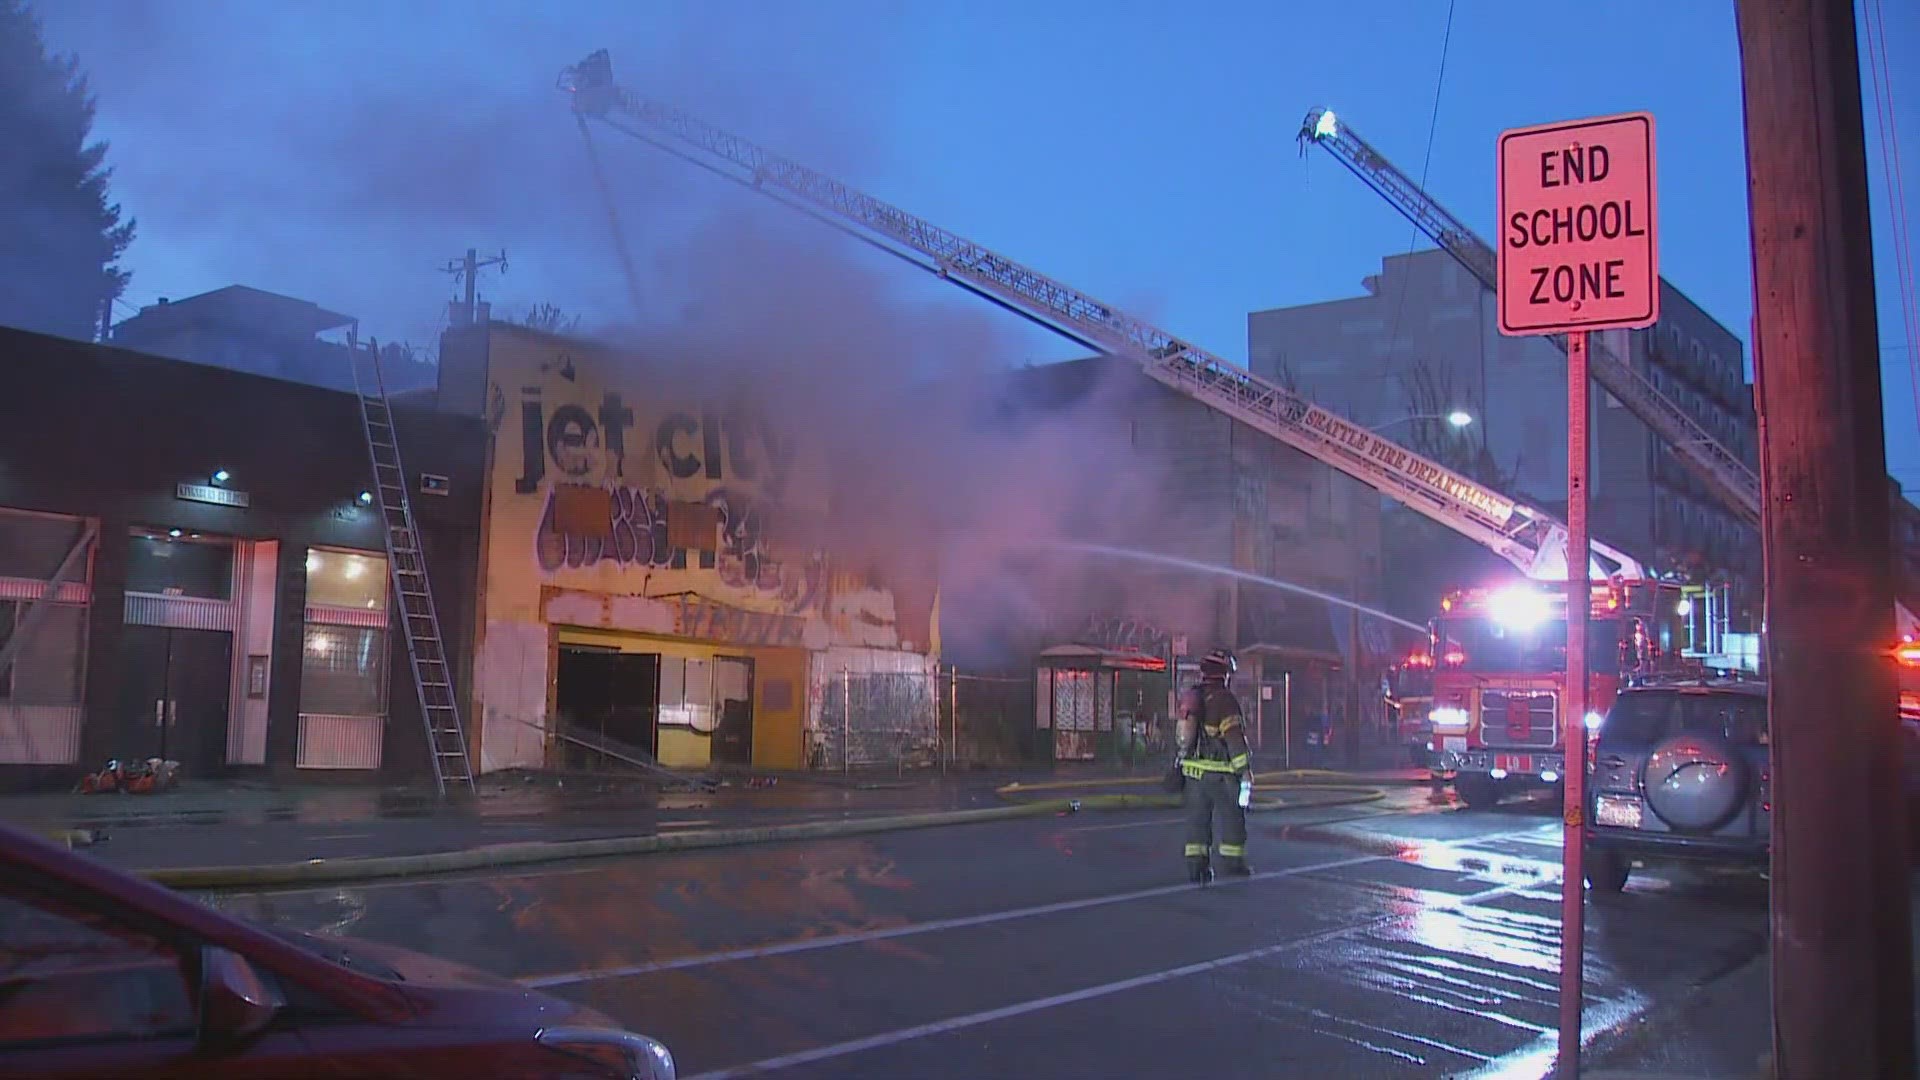 One person was found dead after an early-morning blaze at a vacant building in Seattle's University District on Monday.